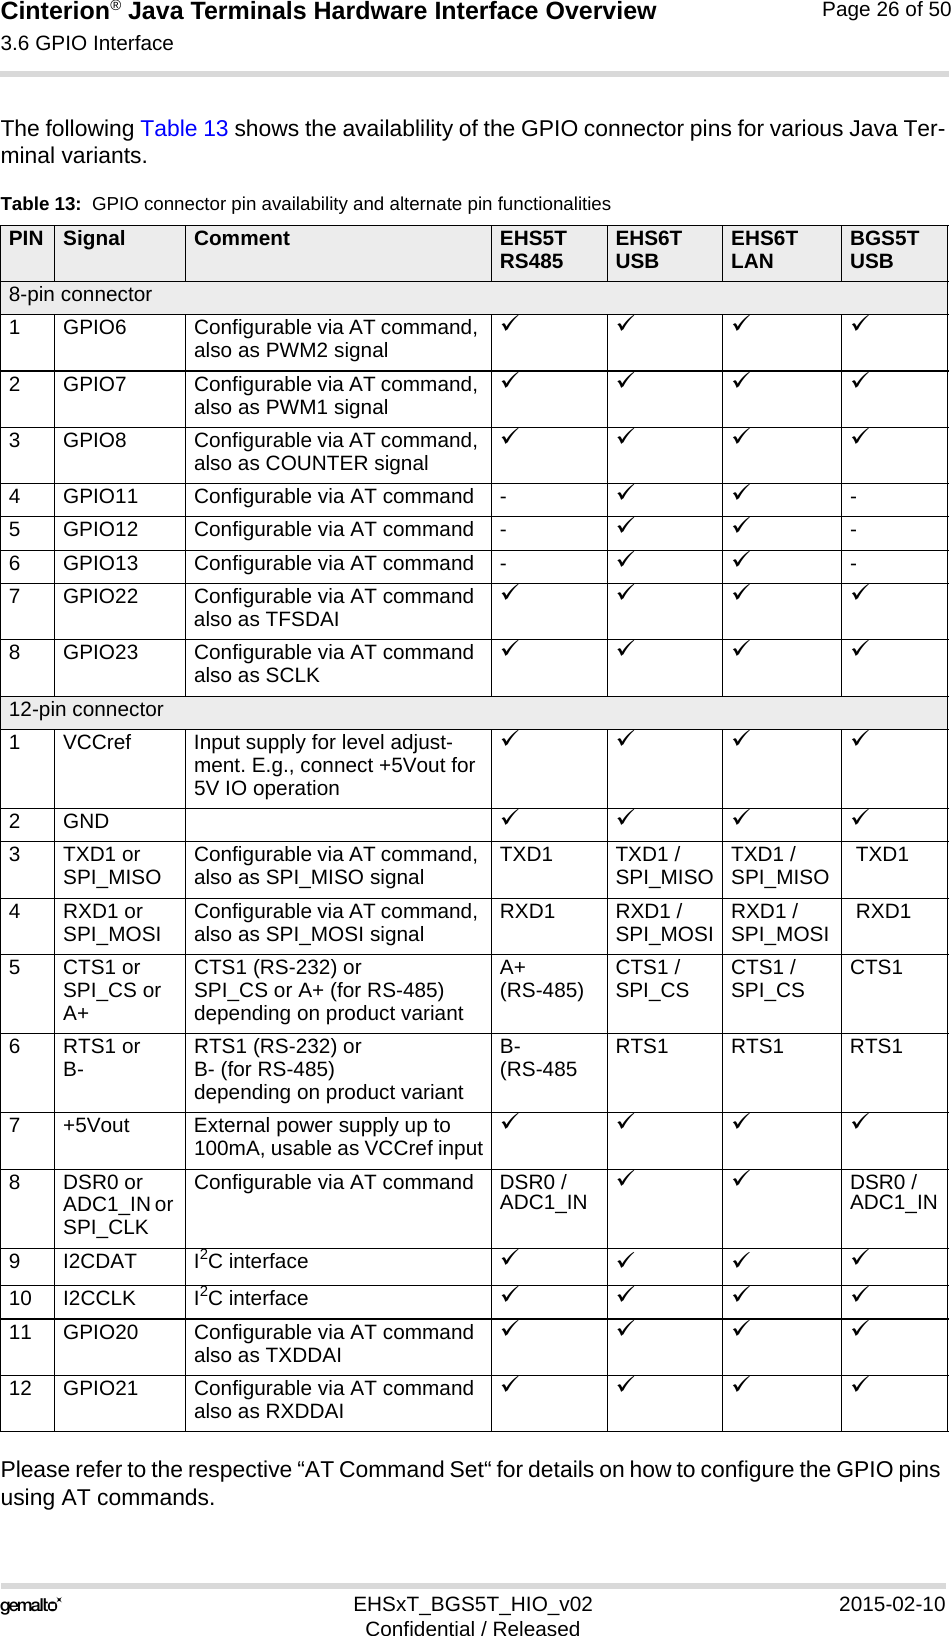 Cinterion® Java Terminals Hardware Interface Overview3.6 GPIO Interface39EHSxT_BGS5T_HIO_v02 2015-02-10Confidential / ReleasedPage 26 of 50The following Table 13 shows the availablility of the GPIO connector pins for various Java Ter-minal variants. Please refer to the respective “AT Command Set“ for details on how to configure the GPIO pins using AT commands.Table 13:  GPIO connector pin availability and alternate pin functionalitiesPIN Signal Comment EHS5T RS485 EHS6T USB EHS6T LAN BGS5T USB8-pin connector1 GPIO6 Configurable via AT command, also as PWM2 signal 2 GPIO7 Configurable via AT command, also as PWM1 signal 3 GPIO8 Configurable via AT command, also as COUNTER signal 4 GPIO11 Configurable via AT command -  -5 GPIO12 Configurable via AT command -  -6 GPIO13 Configurable via AT command -  -7 GPIO22 Configurable via AT command also as TFSDAI 8 GPIO23 Configurable via AT command also as SCLK 12-pin connector1 VCCref Input supply for level adjust-ment. E.g., connect +5Vout for 5V IO operation 2GND  3TXD1 orSPI_MISO Configurable via AT command, also as SPI_MISO signal TXD1 TXD1 /SPI_MISO TXD1 /SPI_MISO  TXD14 RXD1 orSPI_MOSI Configurable via AT command, also as SPI_MOSI signal RXD1 RXD1 /SPI_MOSI RXD1 /SPI_MOSI  RXD15CTS1 orSPI_CS orA+CTS1 (RS-232) or SPI_CS or A+ (for RS-485) depending on product variantA+(RS-485) CTS1 /SPI_CS CTS1 /SPI_CS CTS1 6RTS1 orB- RTS1 (RS-232) or B- (for RS-485) depending on product variantB-(RS-485 RTS1 RTS1 RTS17 +5Vout External power supply up to 100mA, usable as VCCref input 8 DSR0 or ADC1_IN or SPI_CLKConfigurable via AT command DSR0 /ADC1_IN DSR0 /ADC1_IN9 I2CDAT I2C interface    10 I2CCLK I2C interface  11 GPIO20 Configurable via AT command also as TXDDAI 12 GPIO21 Configurable via AT command also as RXDDAI 